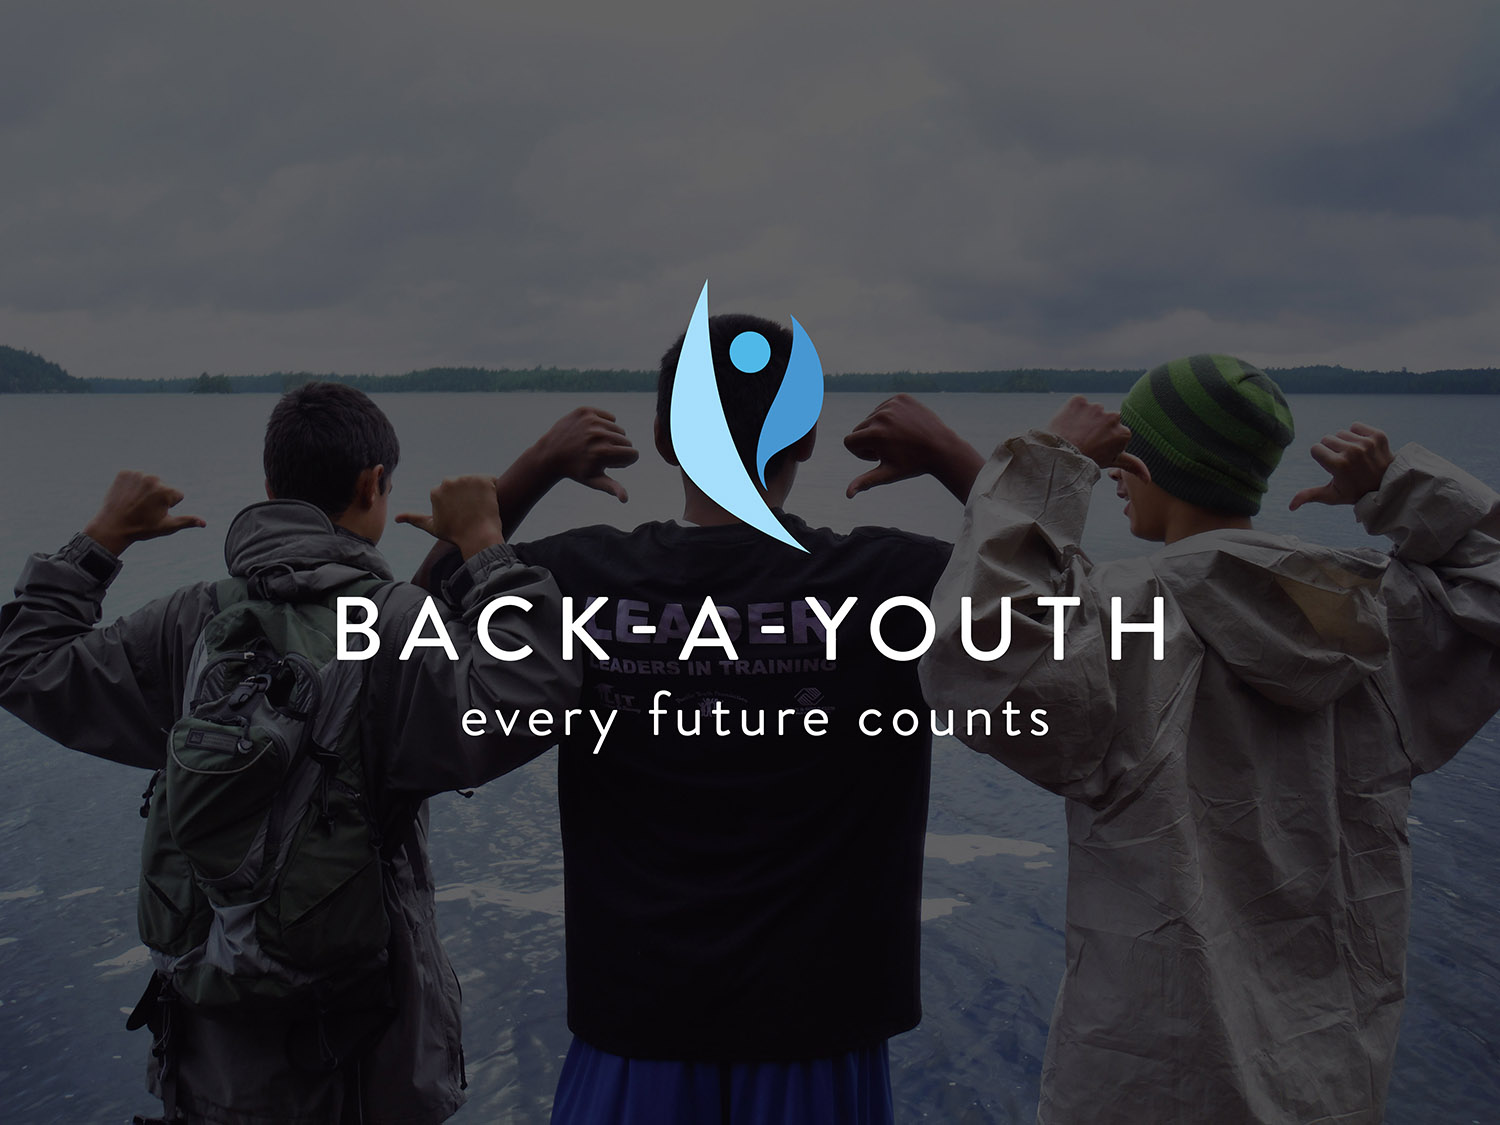 Back-A-Youth: Every Future Counts!